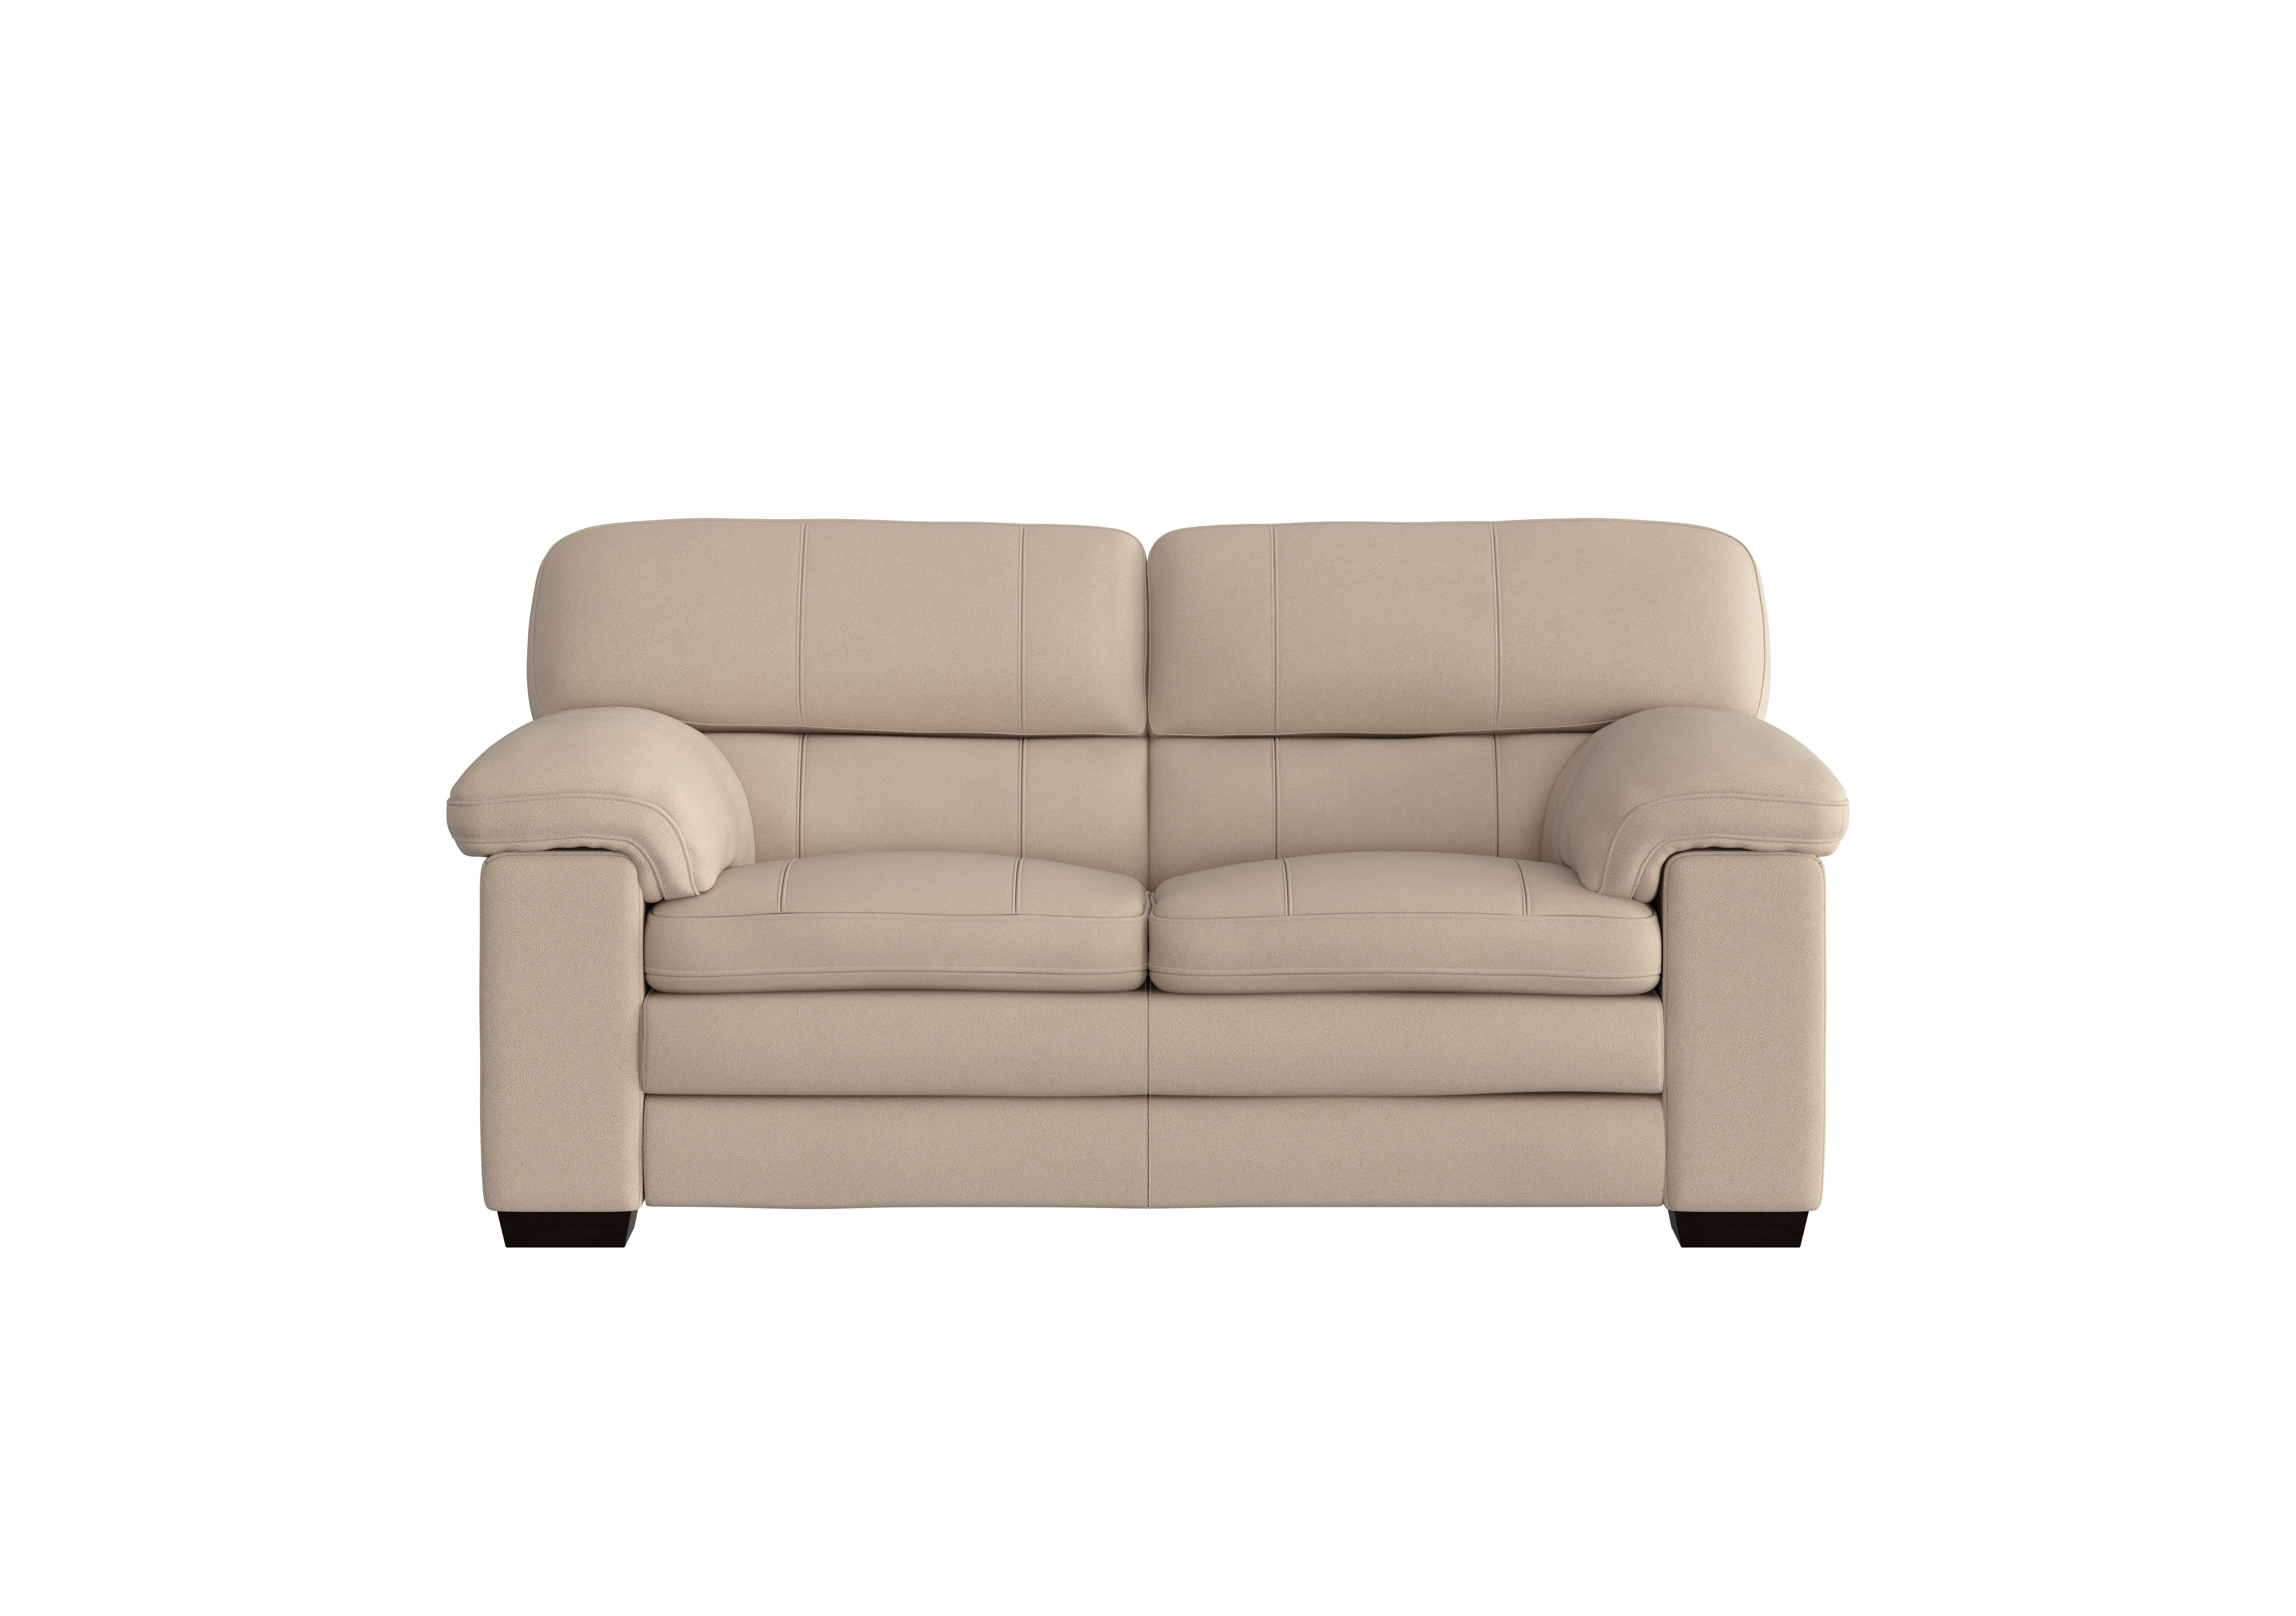 Cozee Fabric 2 Seater Sofa in Bfa-Blj-R20 Bisque on Furniture Village